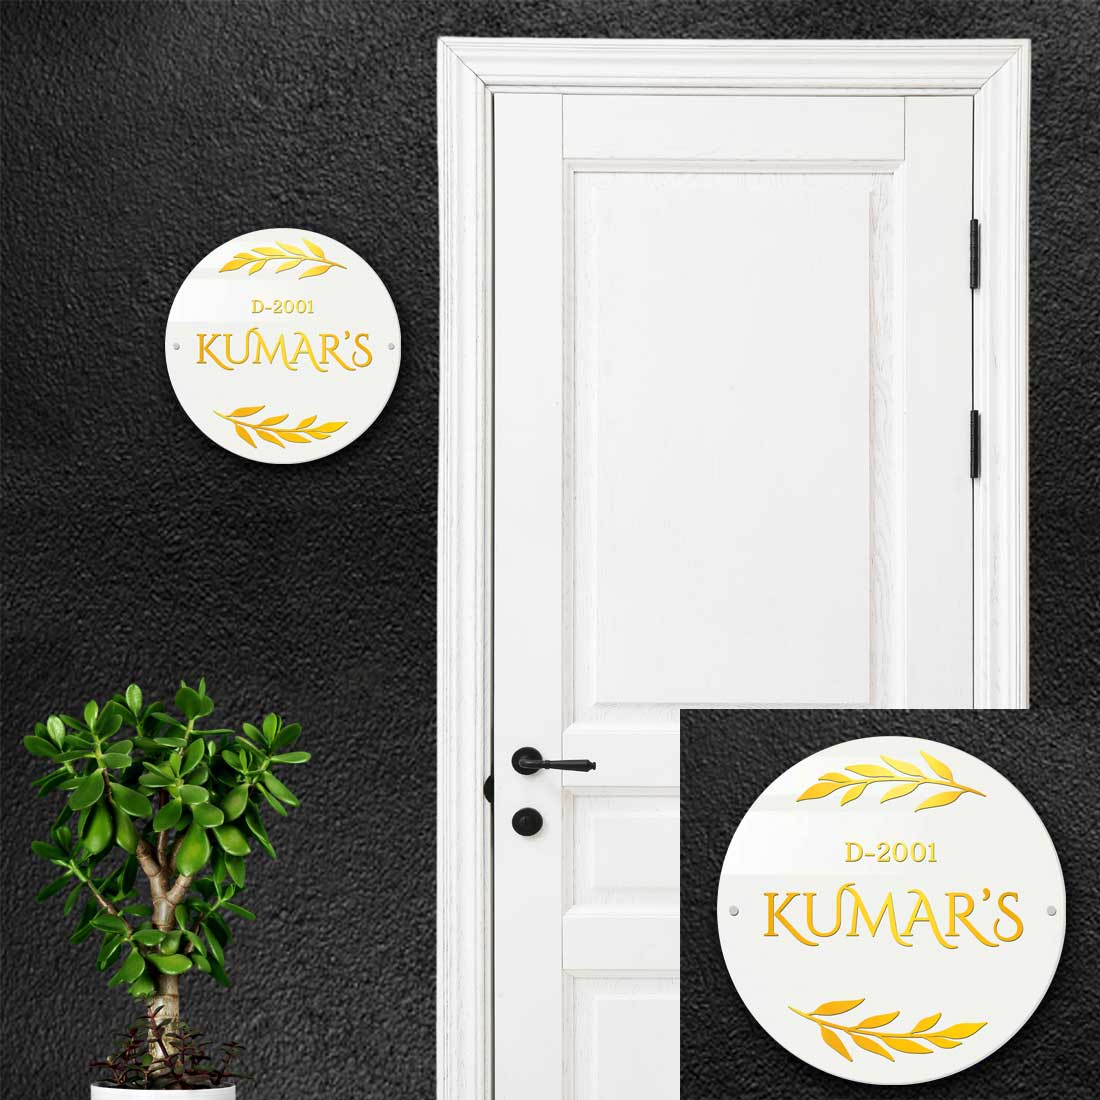 Personalised Golden Acrylic Letters House Name Plate Design for Door Entrance Home Flats - Add Surname